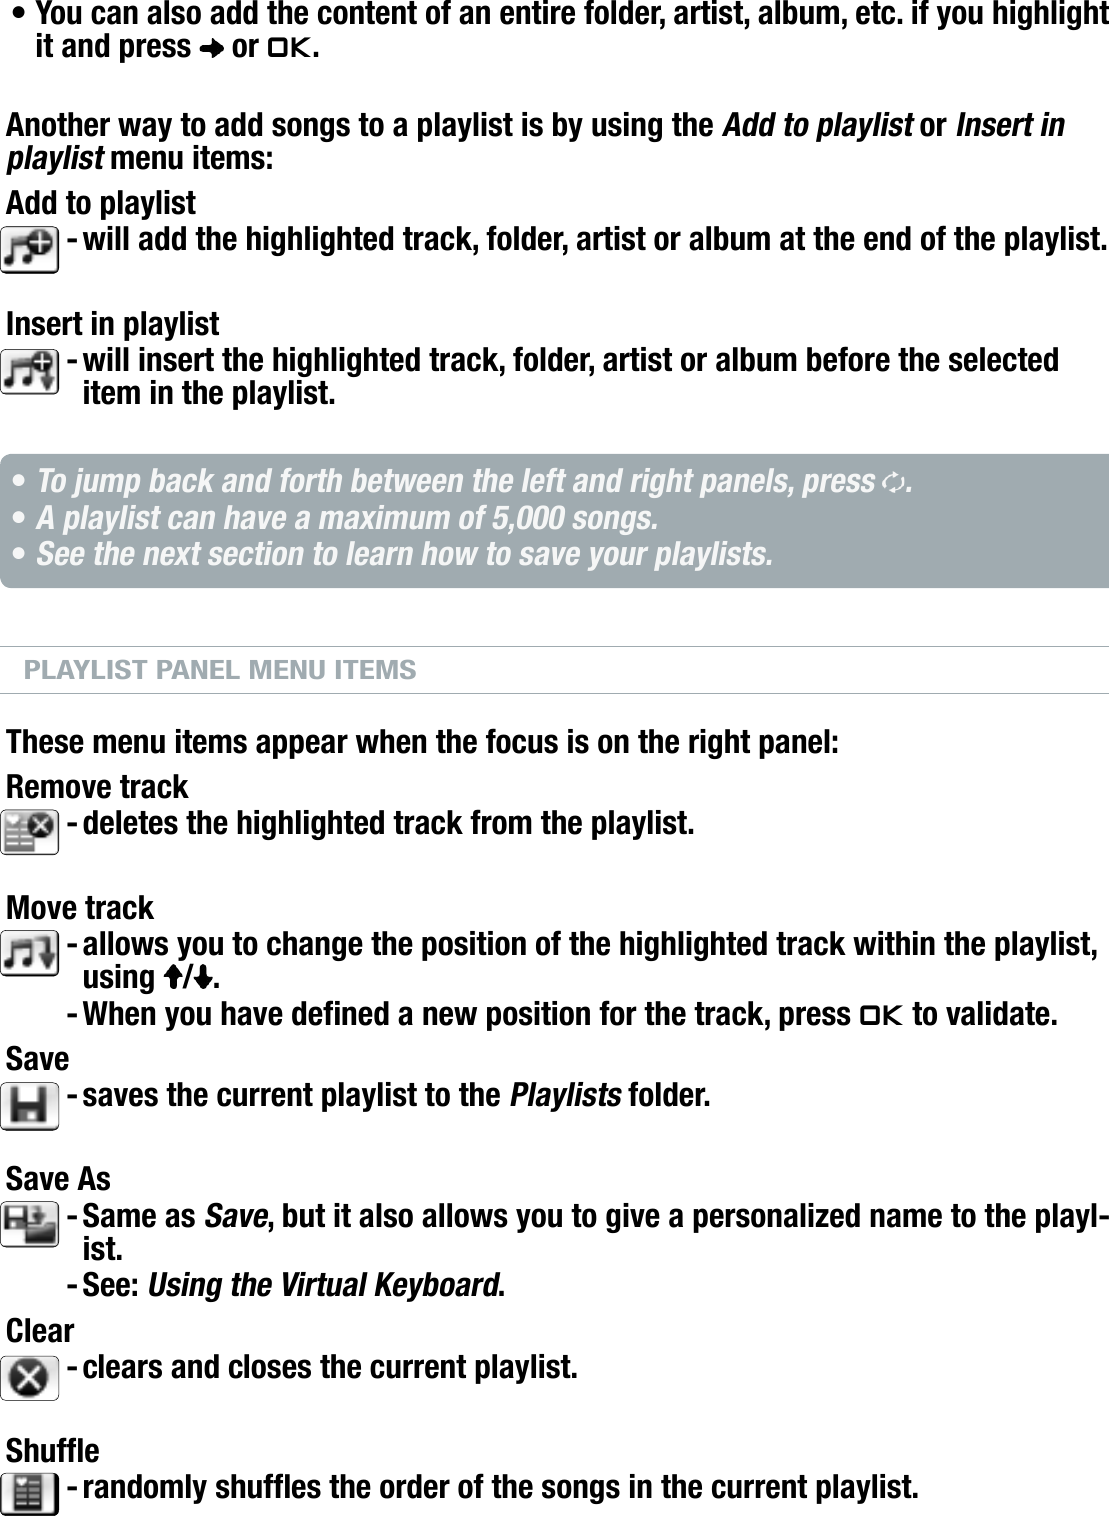 504/604MANUAL V2.0PLAYING MUSIC   &gt;   p. 21You can also add the content of an entire folder, artist, album, etc. if you highlight it and press   or OK.Another way to add songs to a playlist is by using the Add to playlist or Insert in playlist menu items:Add to playlistwill add the highlighted track, folder, artist or album at the end of the playlist.Insert in playlistwill insert the highlighted track, folder, artist or album before the selected item in the playlist.To jump back and forth between the left and right panels, press  .A playlist can have a maximum of 5,000 songs.See the next section to learn how to save your playlists.PLAYLIST PANEL MENU ITEMSThese menu items appear when the focus is on the right panel:Remove trackdeletes the highlighted track from the playlist.Move trackallows you to change the position of the highlighted track within the playlist, using  / .When you have dened a new position for the track, press OK to validate.Savesaves the current playlist to the Playlists folder.Save AsSame as Save, but it also allows you to give a personalized name to the playl-ist.See: Using the Virtual Keyboard.Clearclears and closes the current playlist.Shuferandomly shufes the order of the songs in the current playlist.•--•••--------